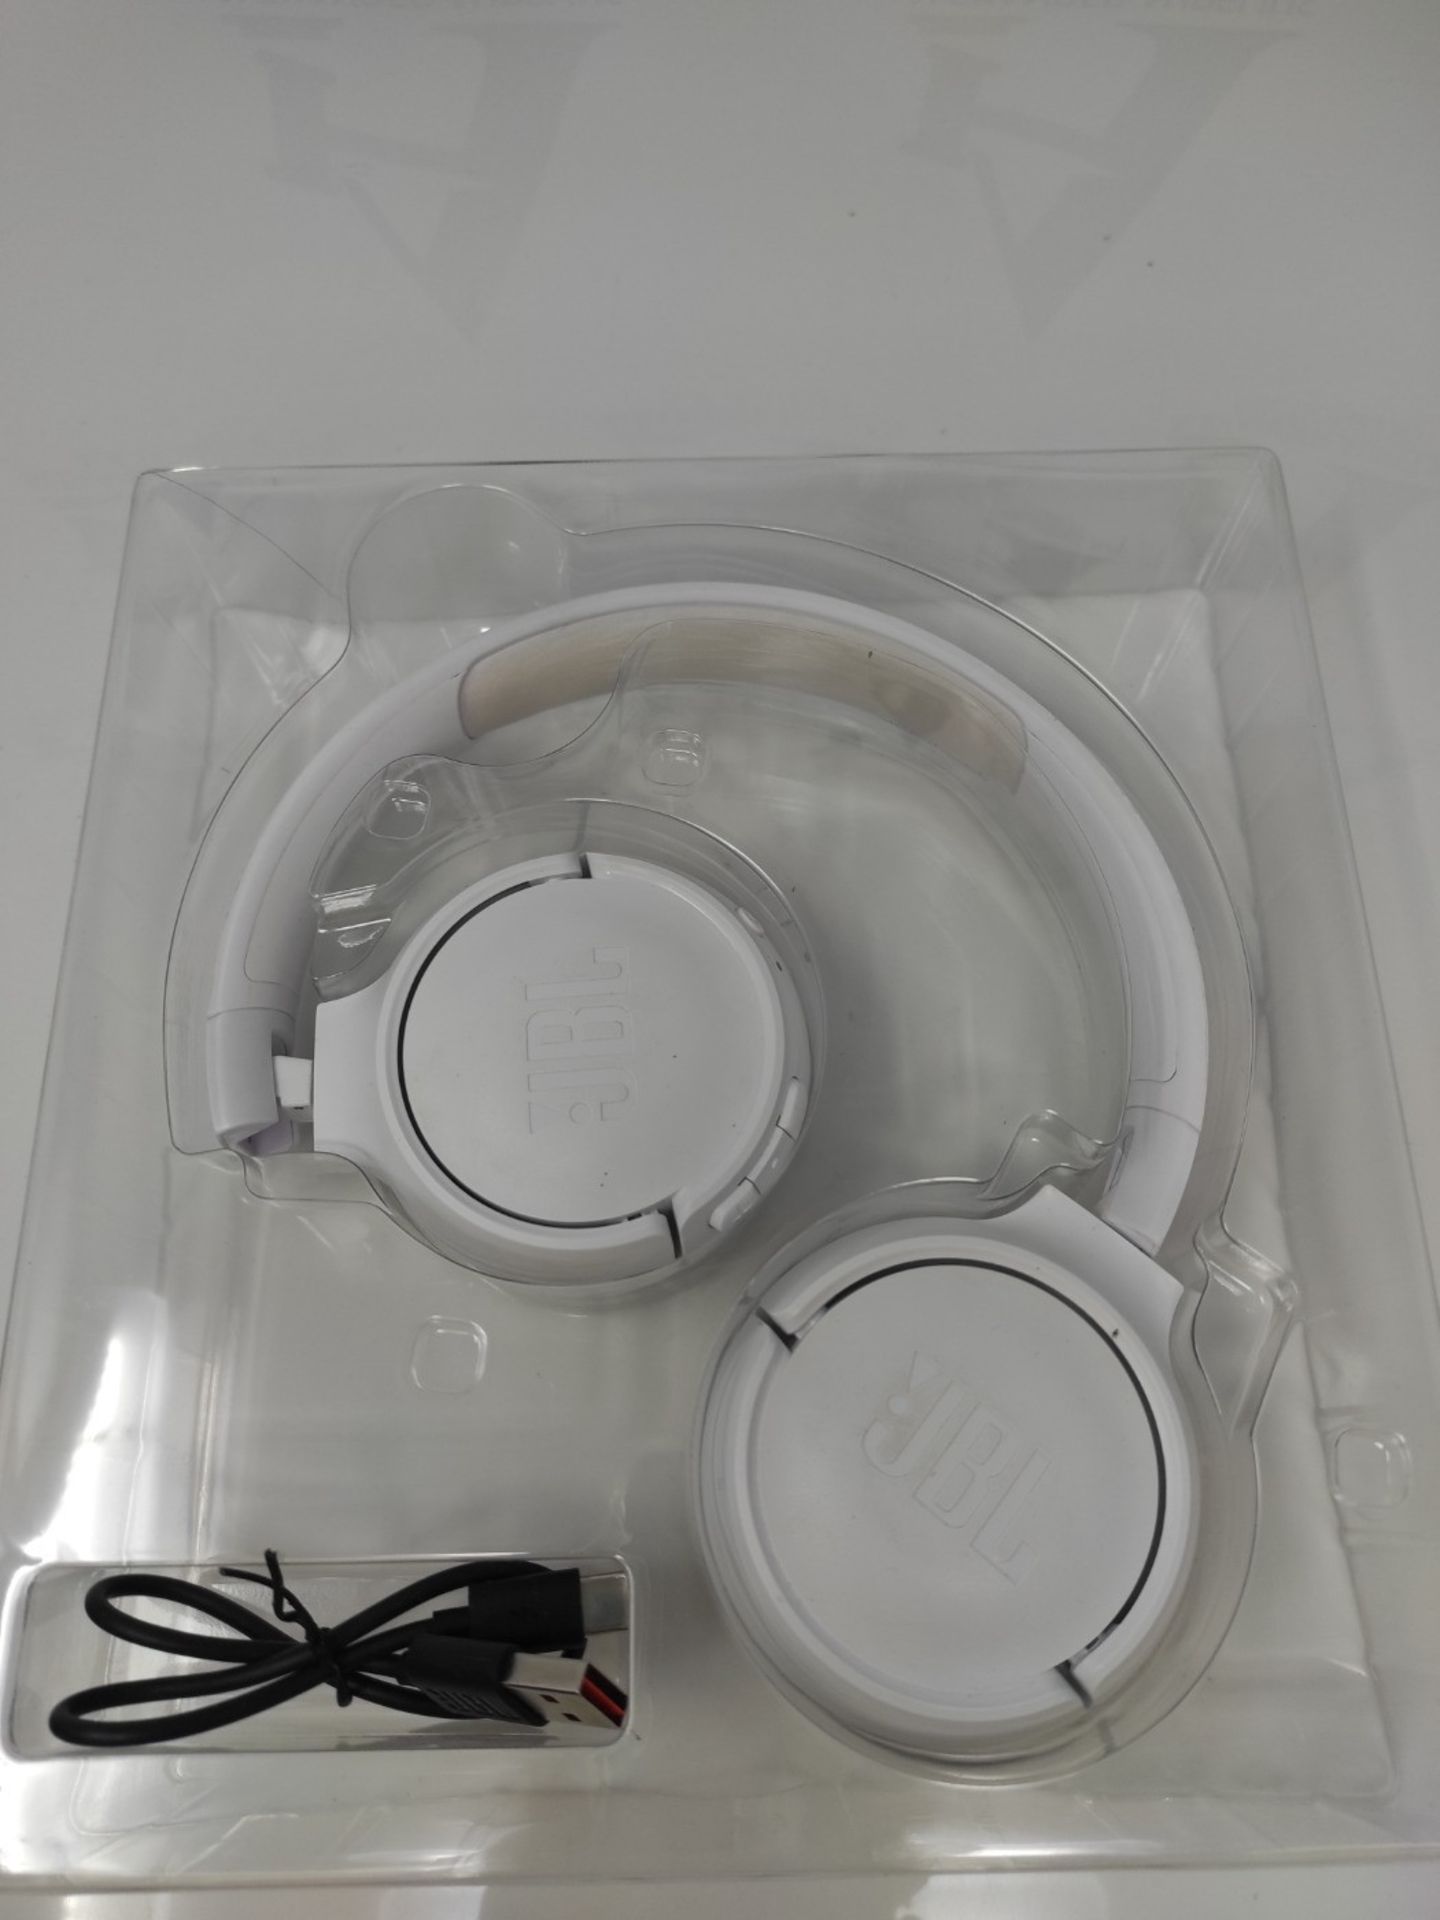 JBL Tune 510BT - Bluetooth over-ear headphones in white - foldable headphones with han - Image 3 of 3